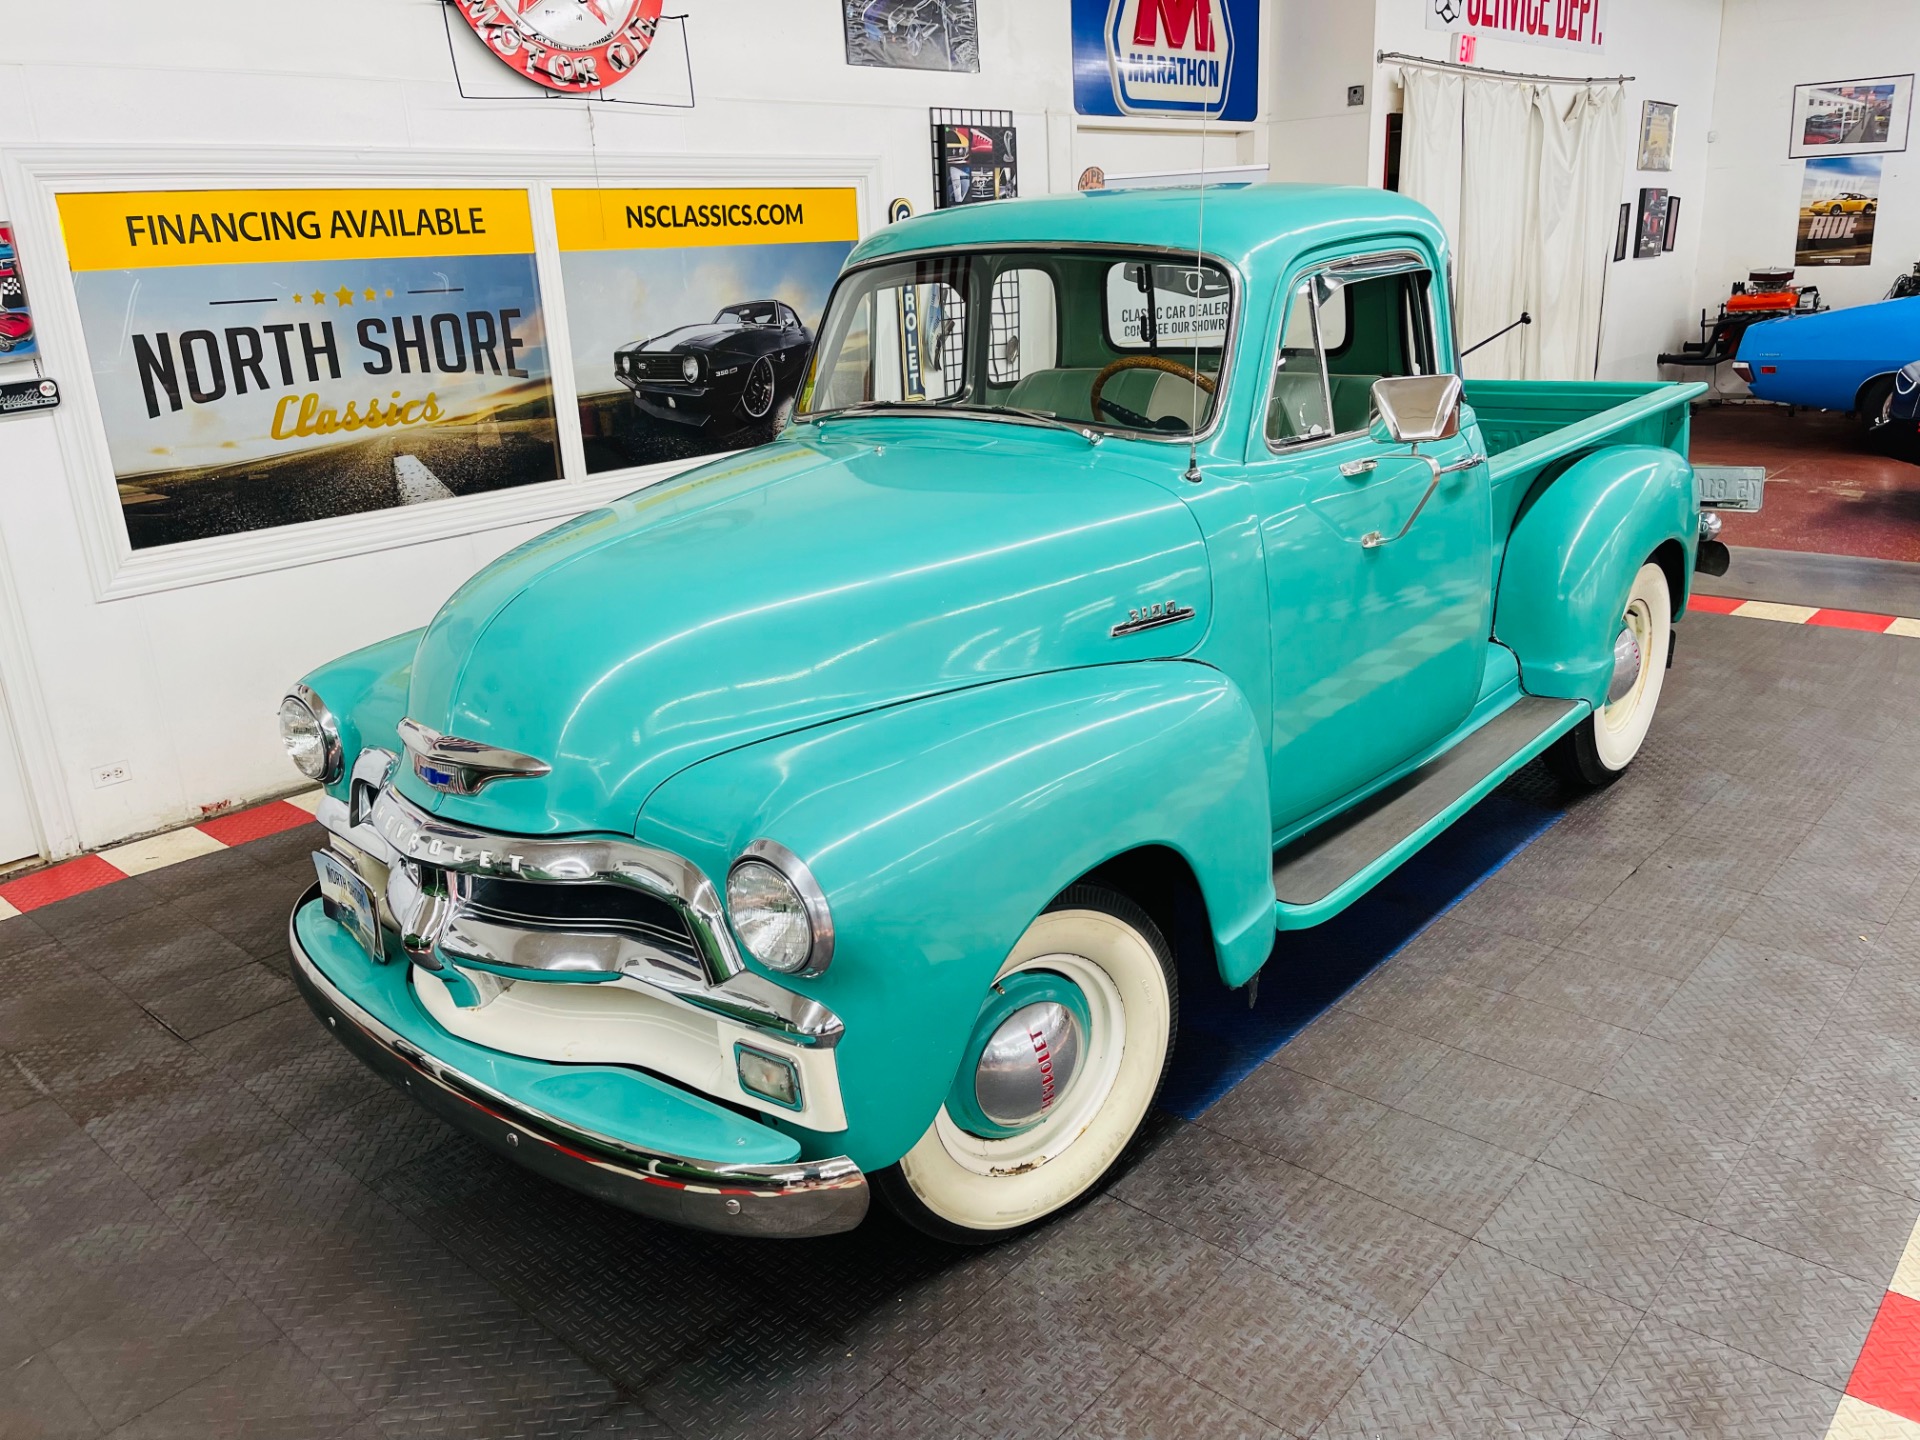 Used 1954 CHEVROLET 3100 - 5 WINDOW PICK UP - SEE VIDEO For Sale (Sold) |  North Shore Classics Stock #54264CV